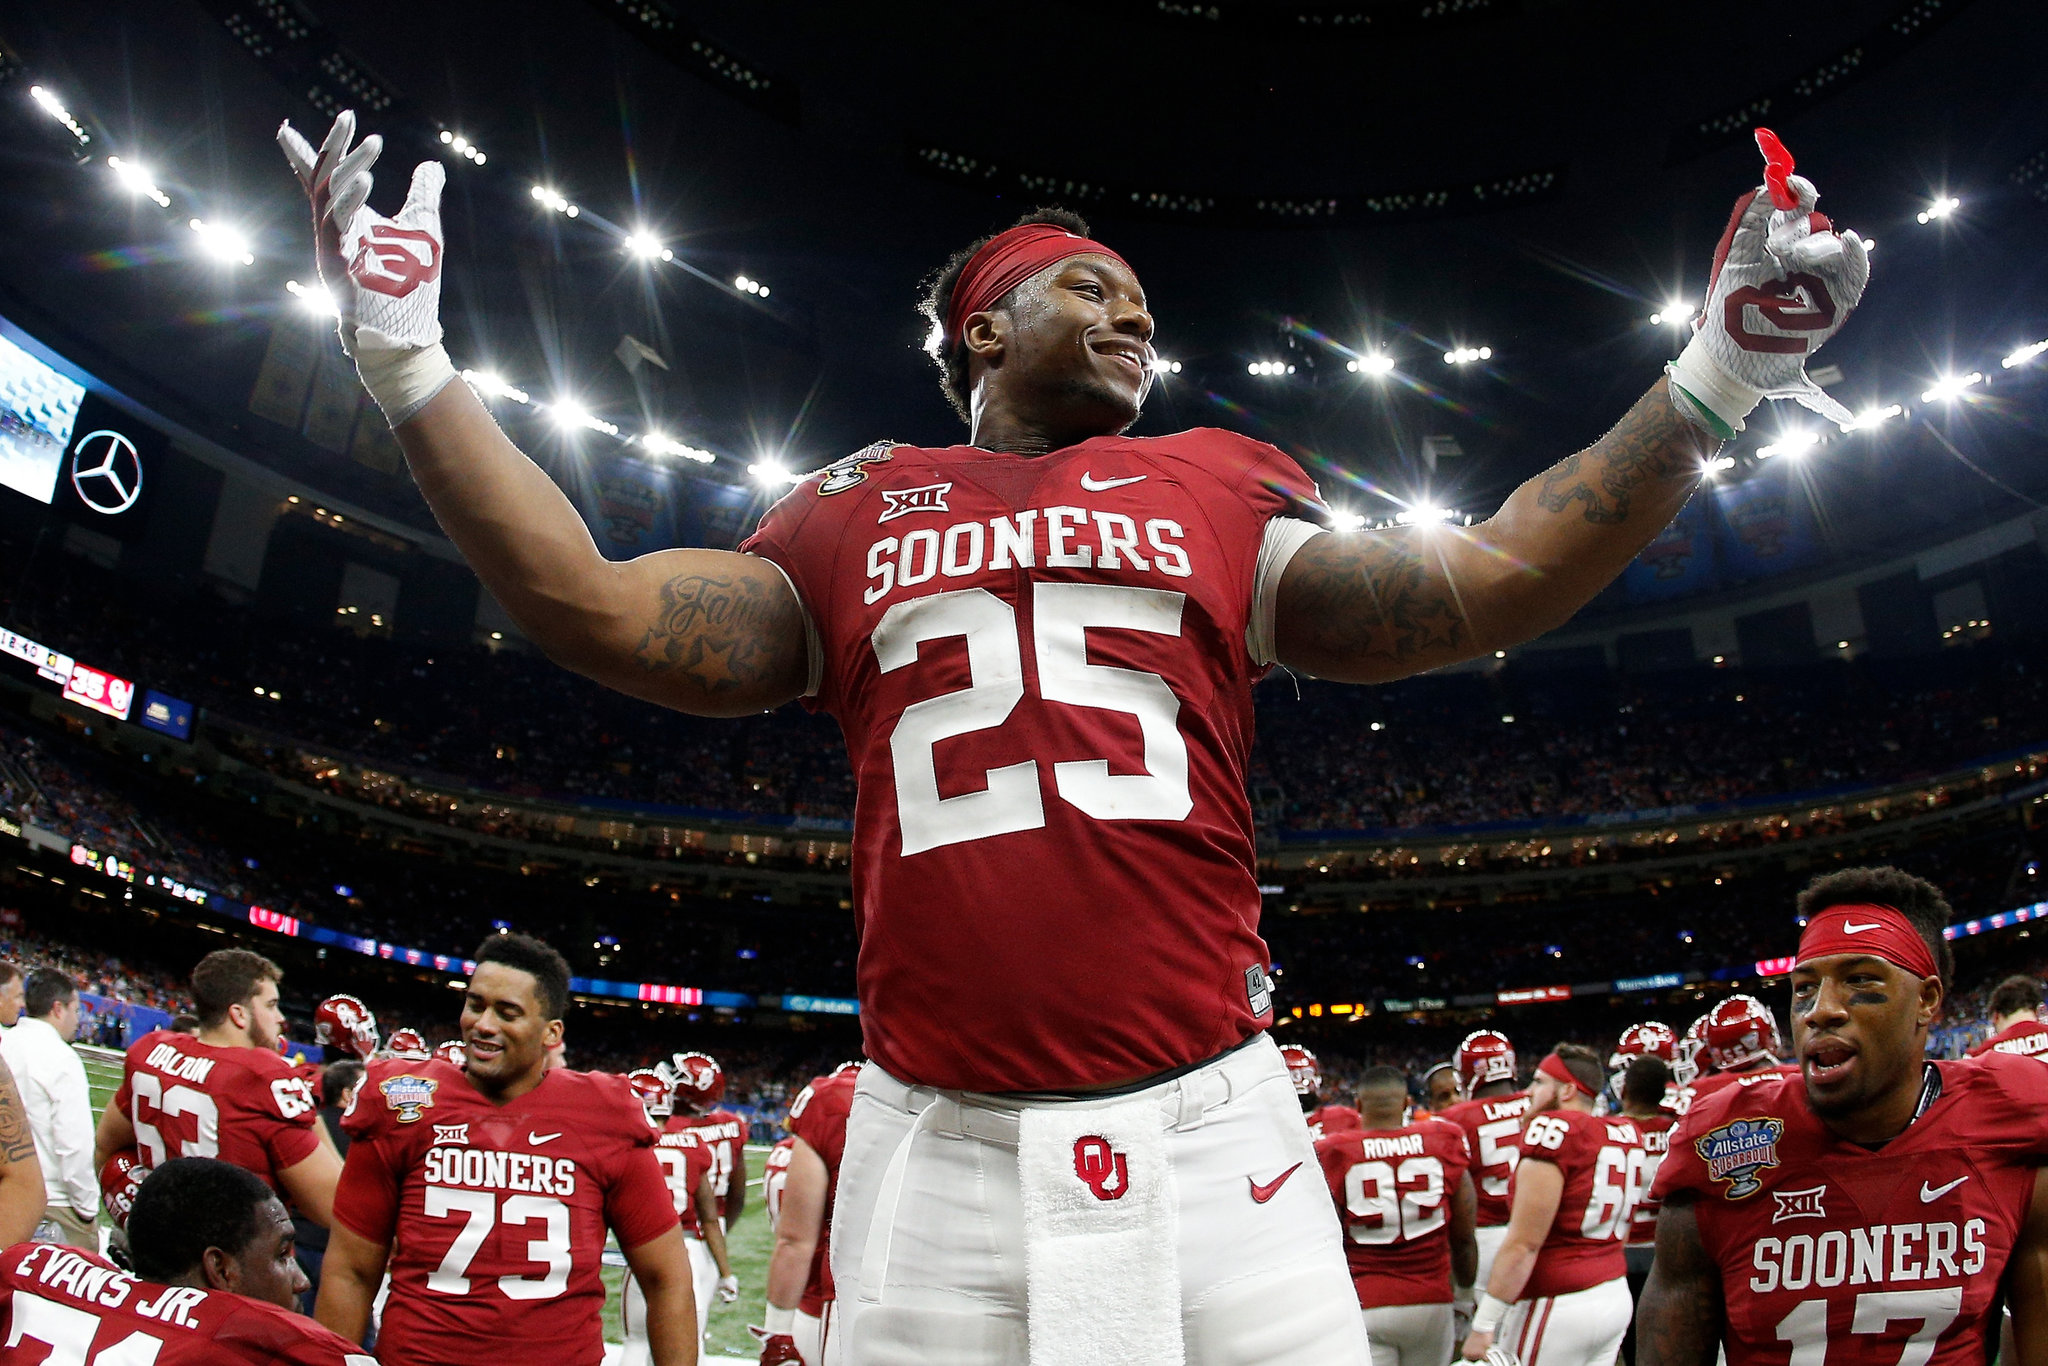 Brent Musburgers Praise of Joe Mixon Who Punched Woman in 14